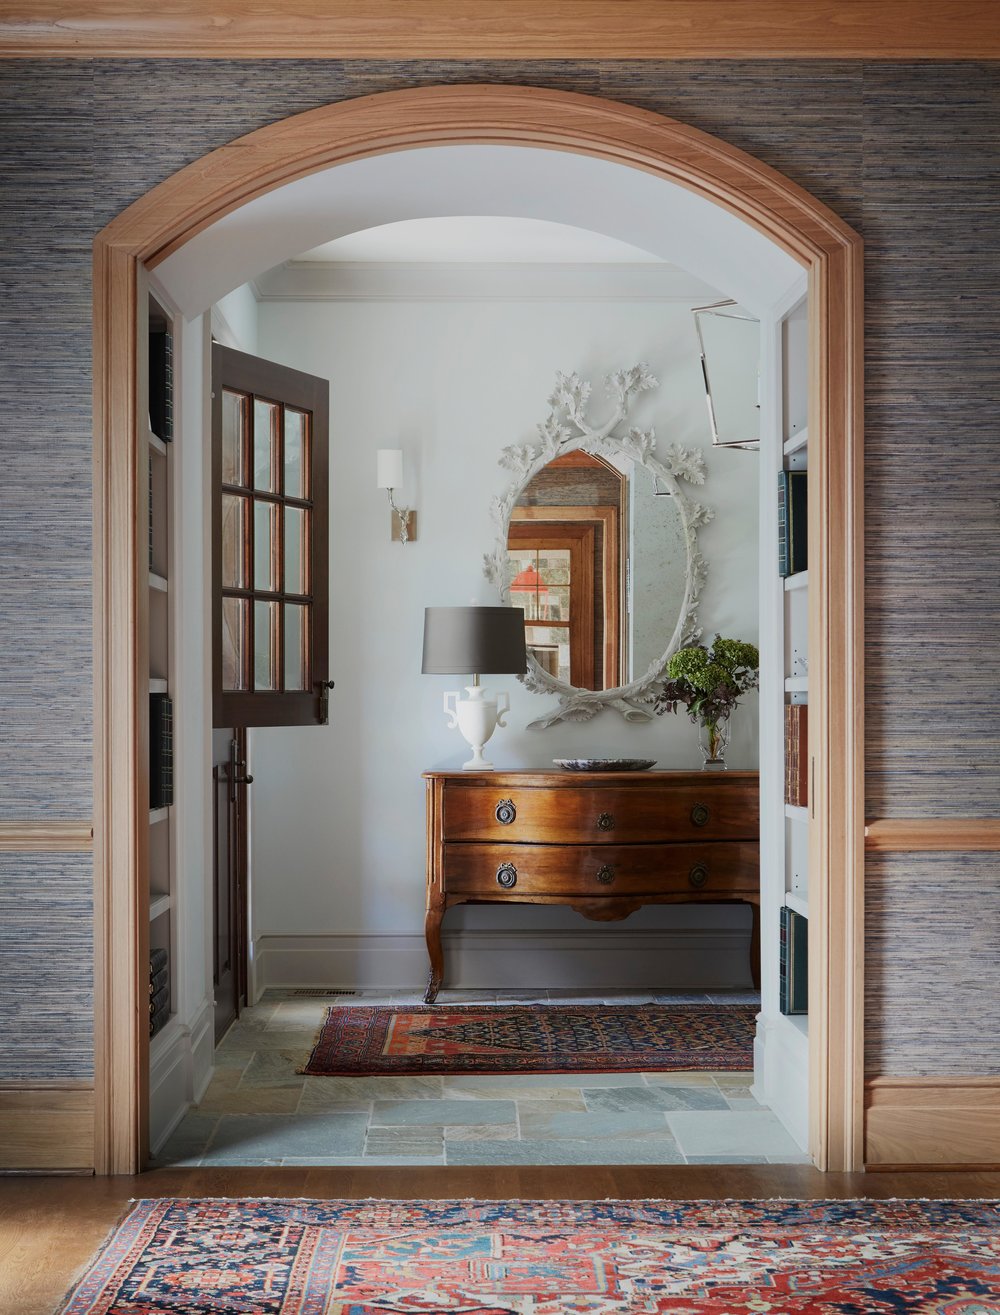 Entry with dutch door, stone floor, and antiques. Come see more interior design inspiration from Elizabeth Drake. Photo by Werner Straube. #interiordesign #classicdesign #traditionaldecor #housetour #elizabethdrake